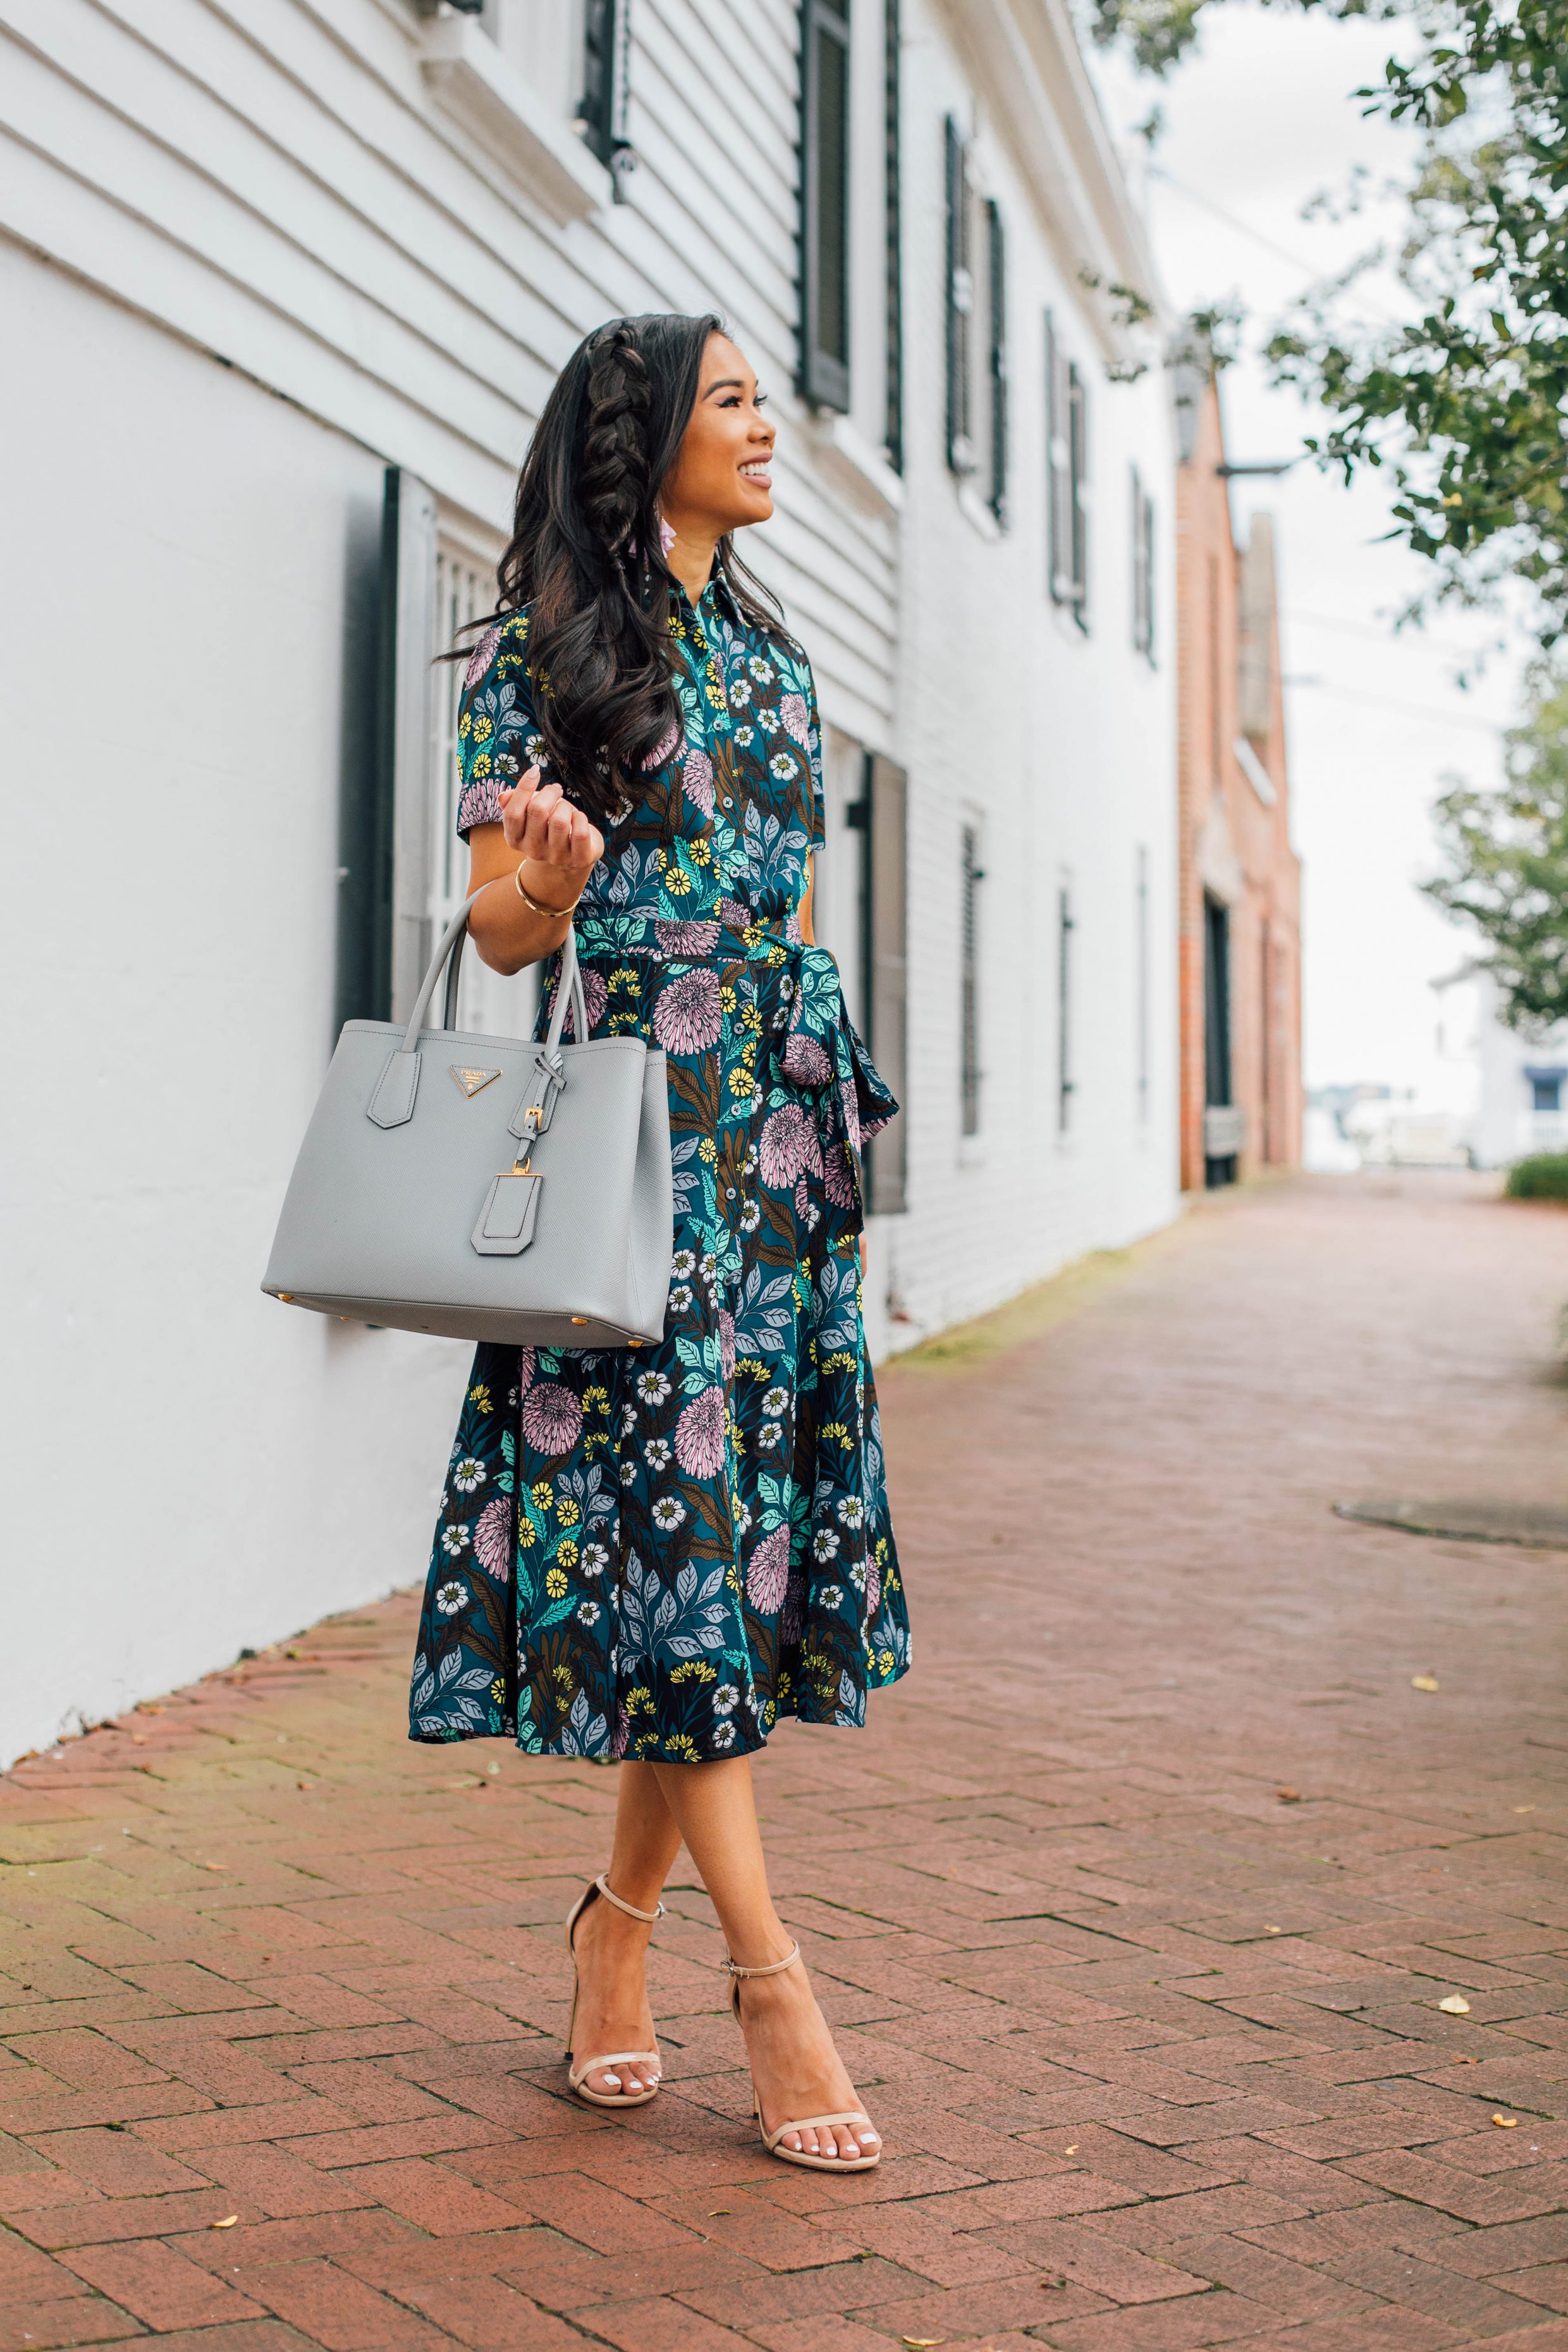 Blogger Hoang-Kim wears a floral transition dress for fall with pockets